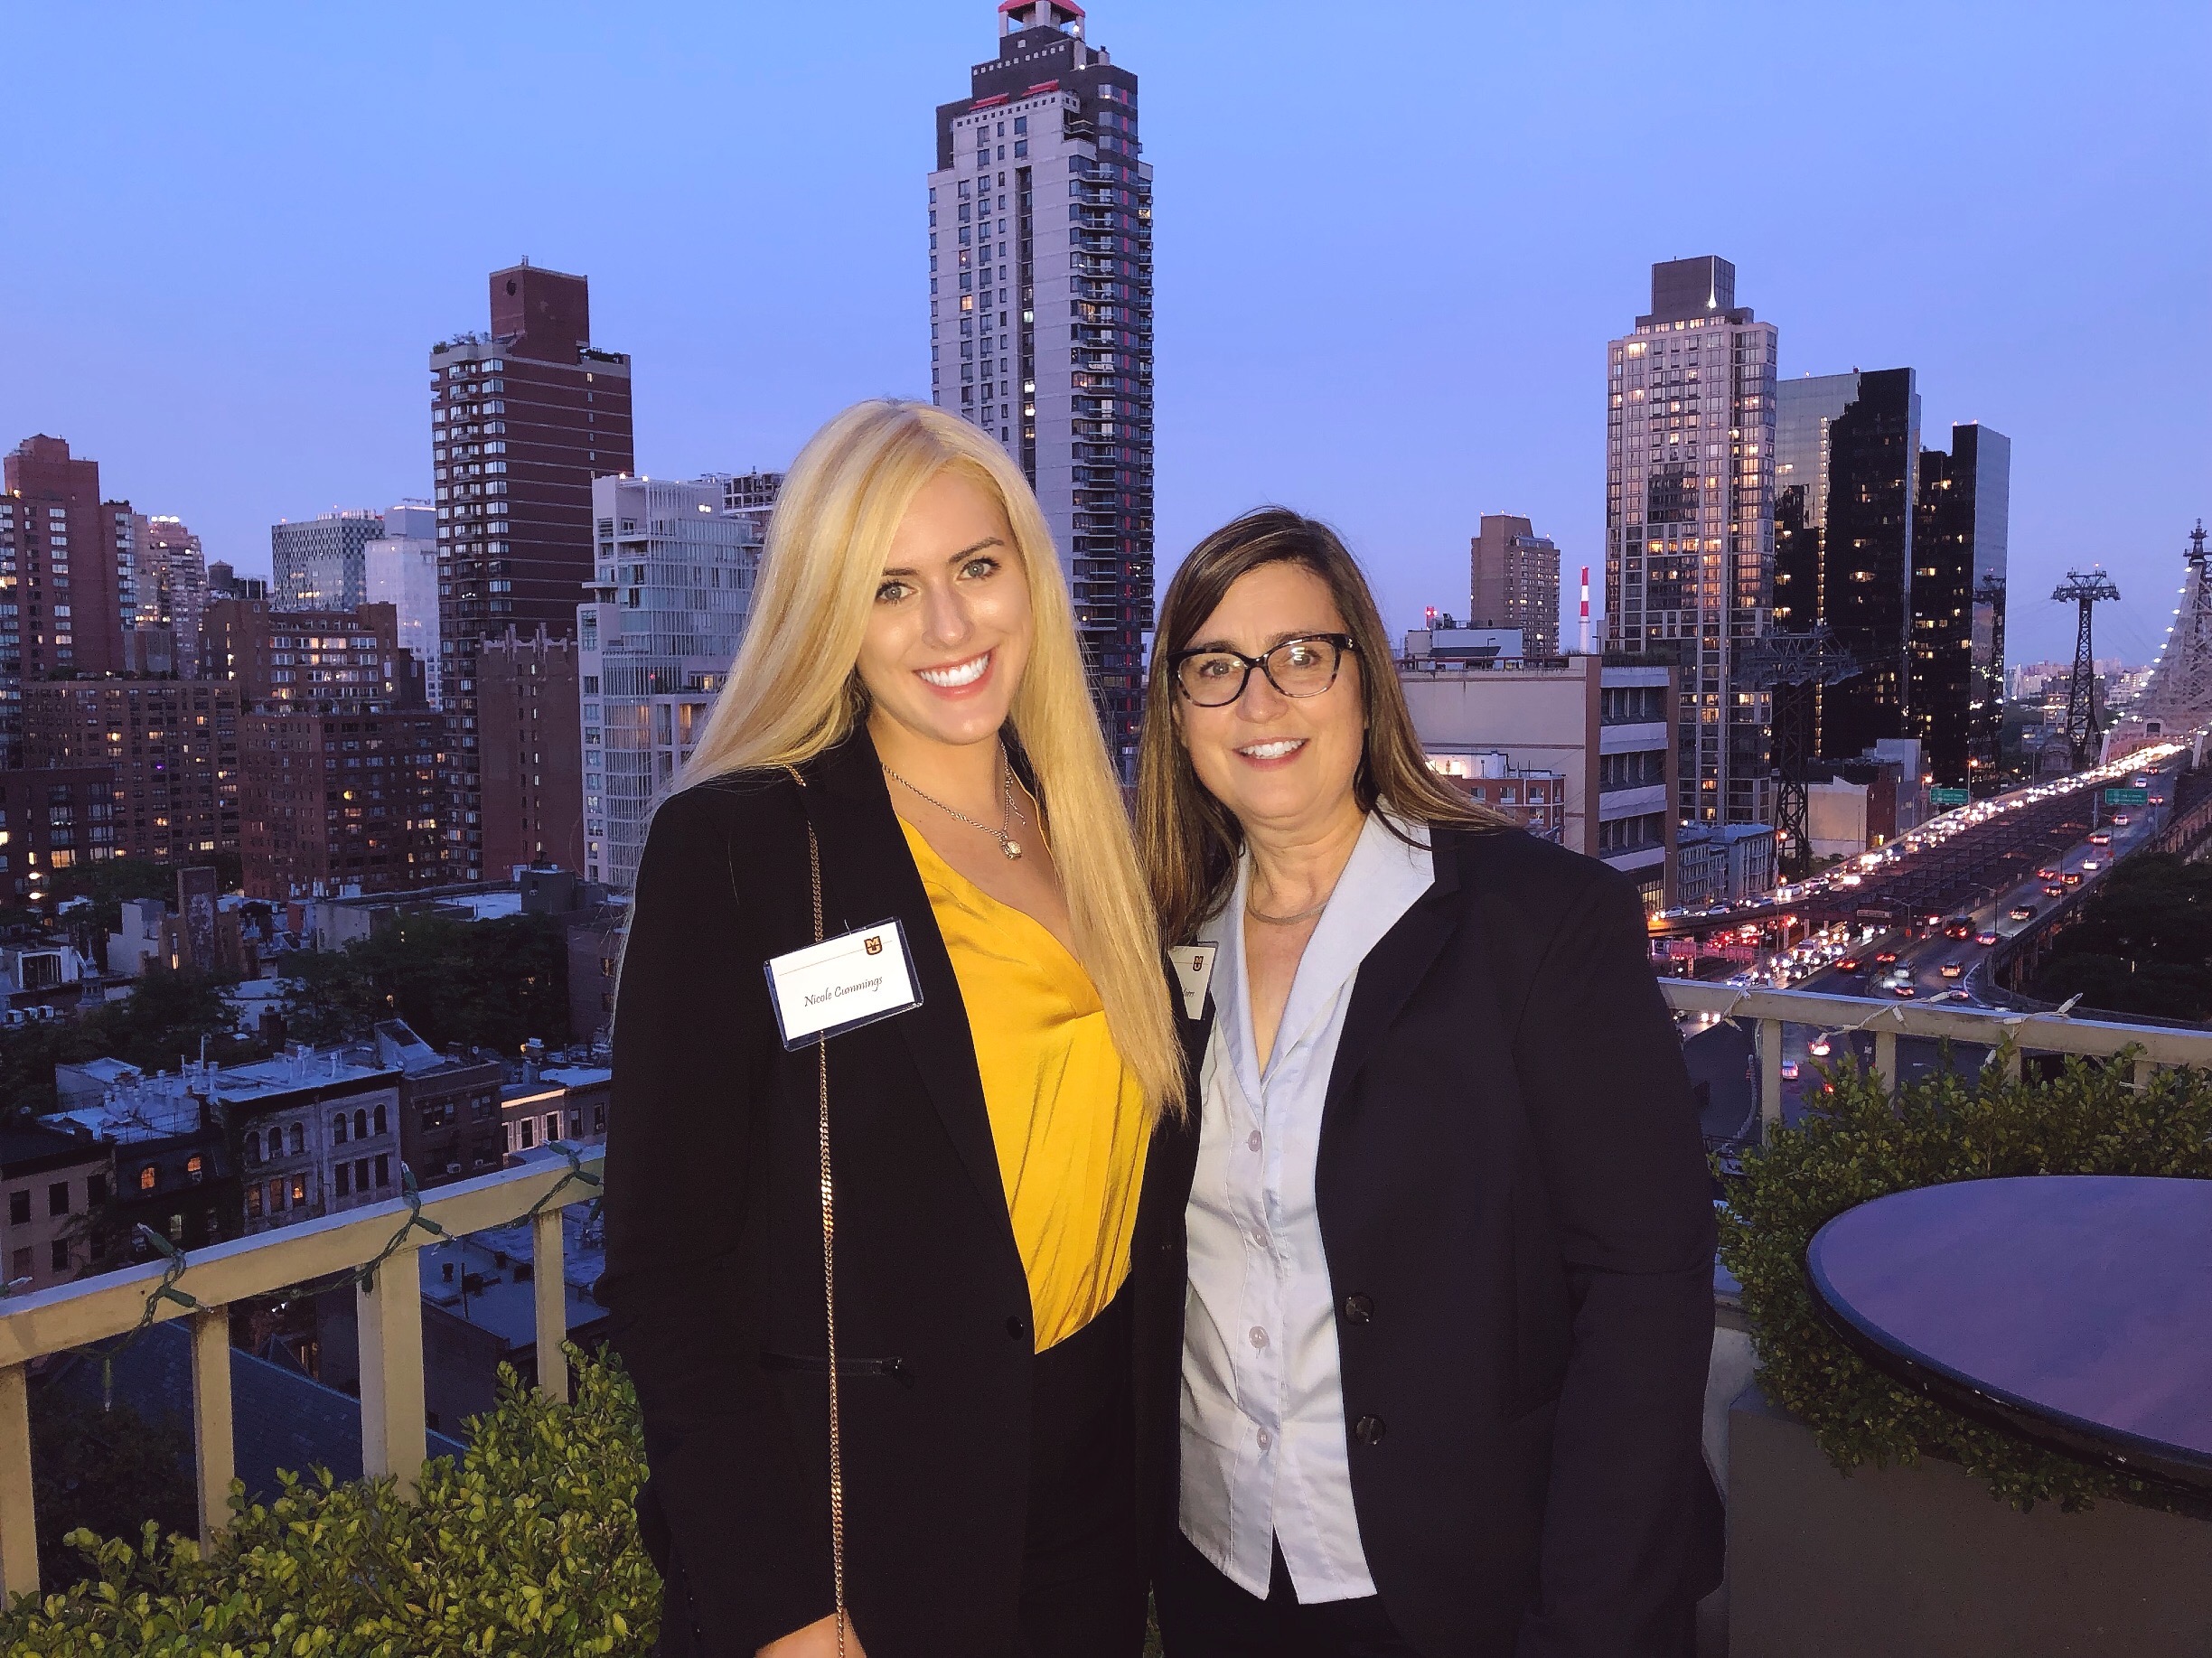 Nicole Cummings (left) with her mentor, Mary Beth Mars, in New York during the Tigers on Wall Street trip. Taken pre-COVID.